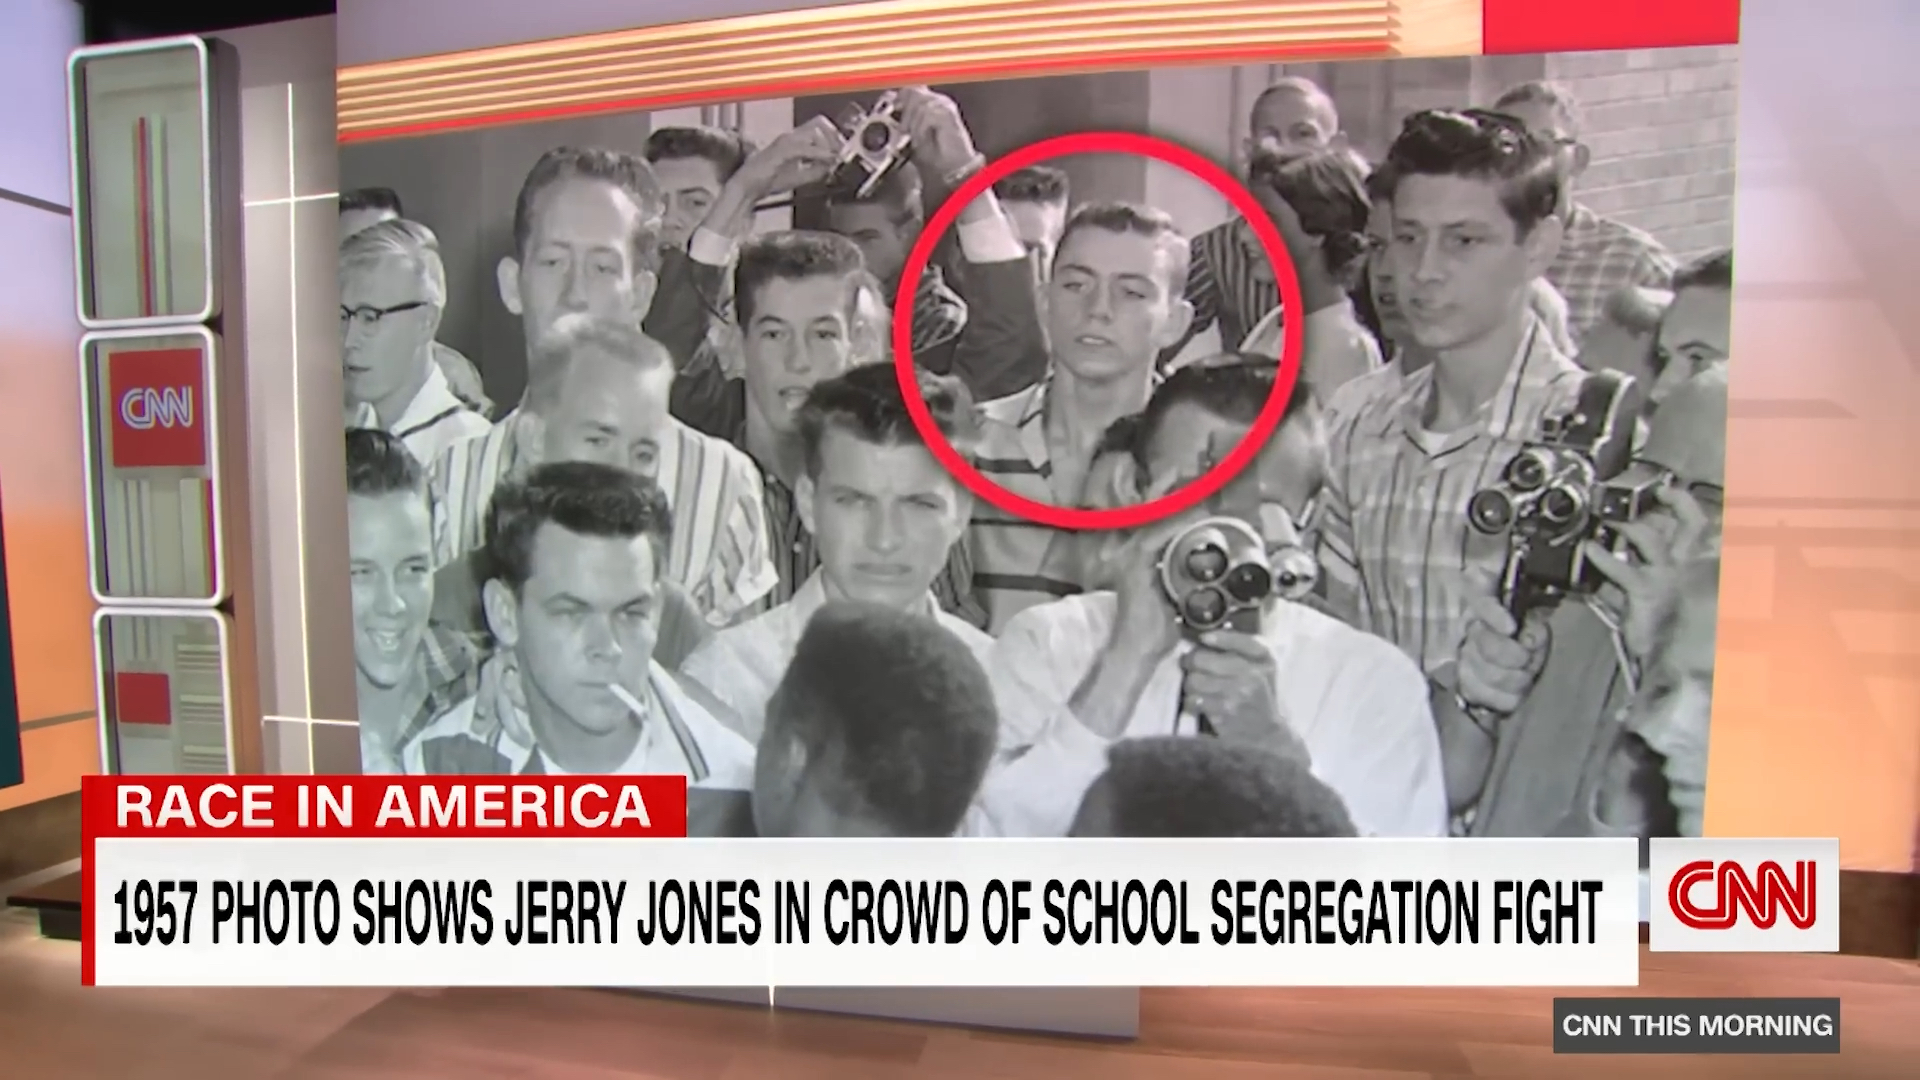 Jerry Jones standing outside of an Arkansas school with anti-segregationists in 1957